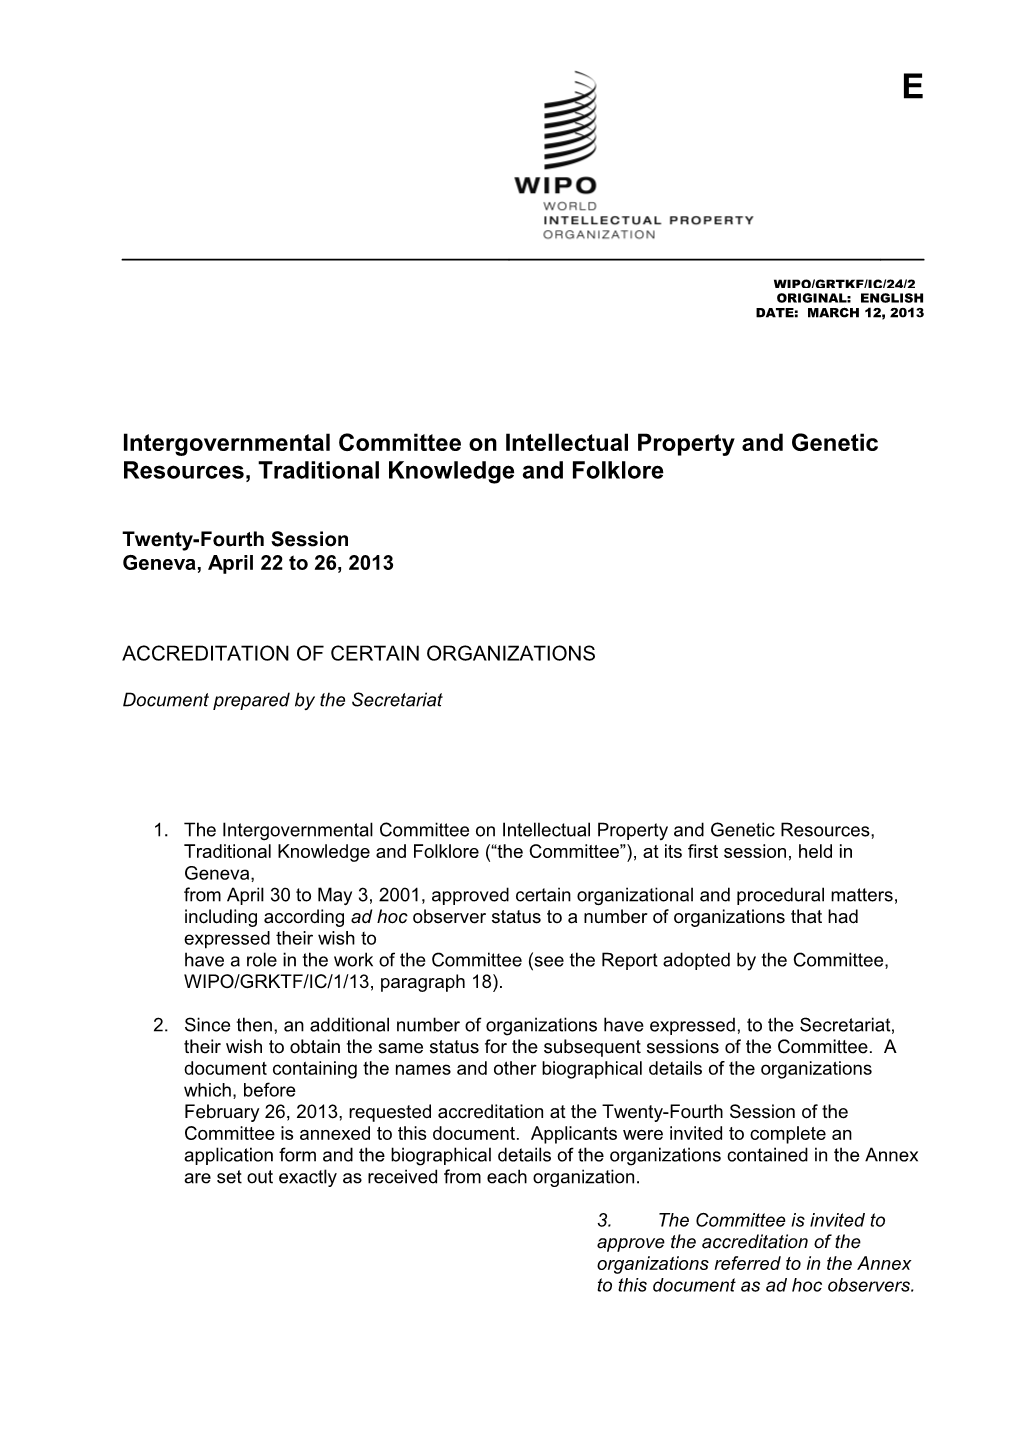 Intergovernmental Committee on Intellectual Property and Genetic Resources, Traditional s7